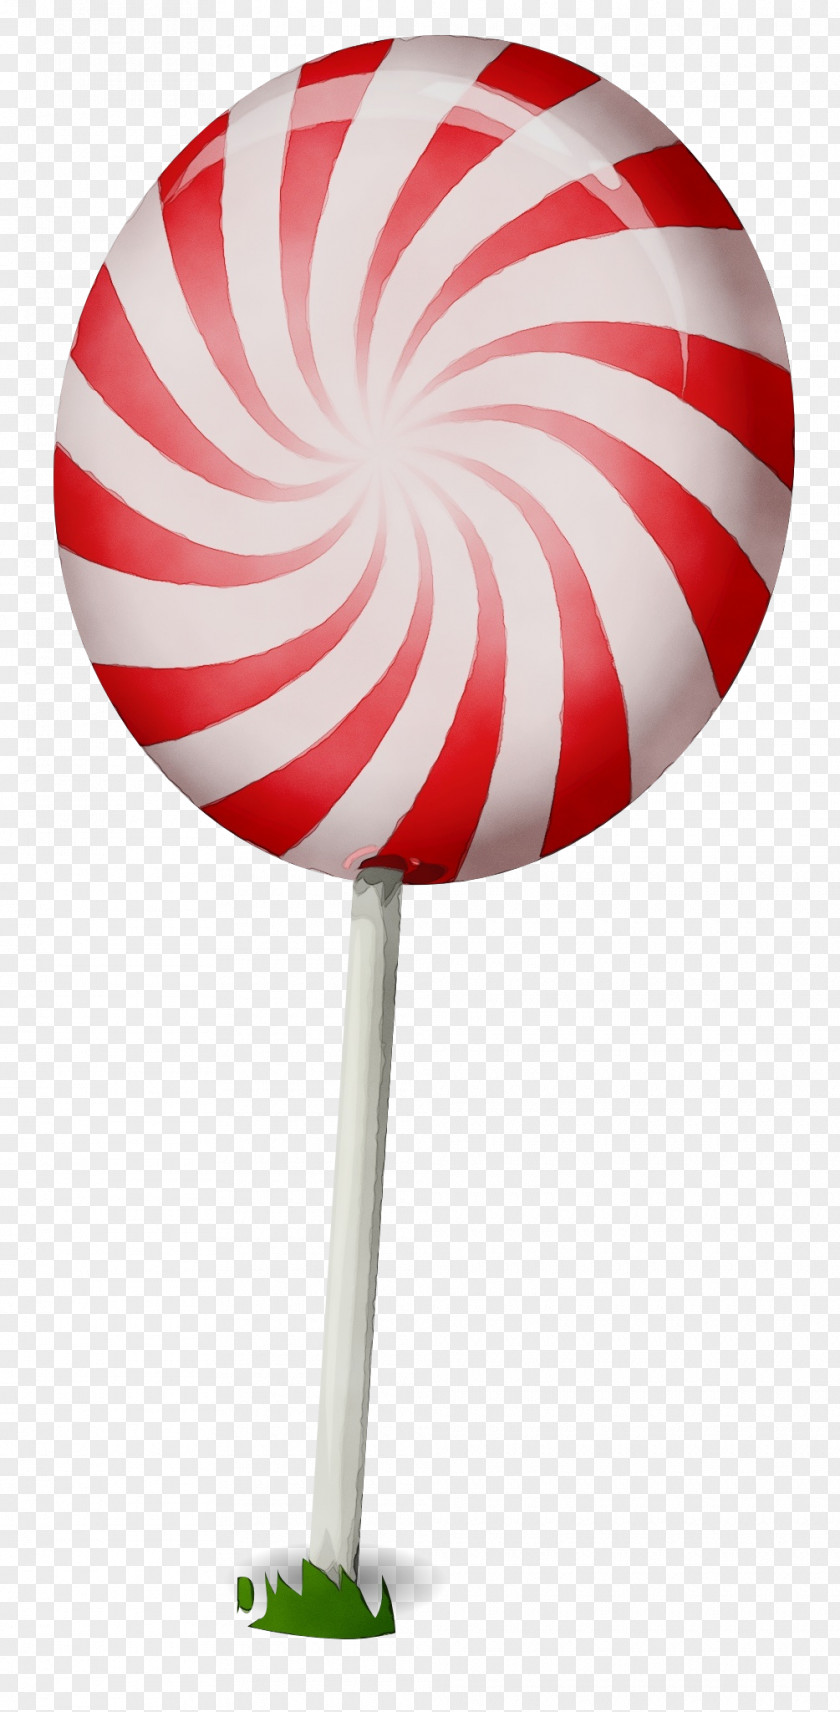 Flag Stick Candy Bubble Cartoon PNG